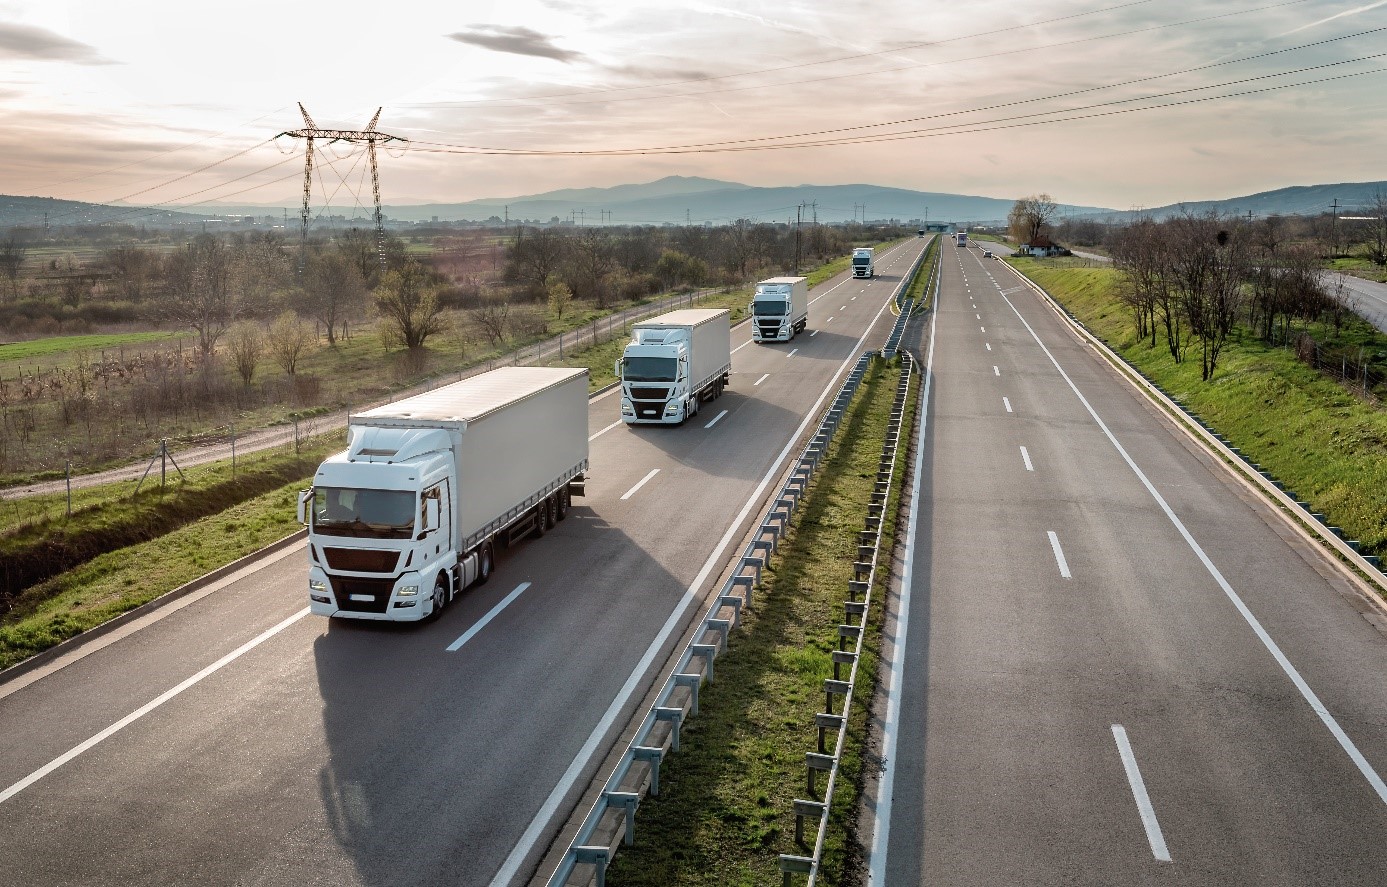 Freight transport, the most vulnerable in the energy chain